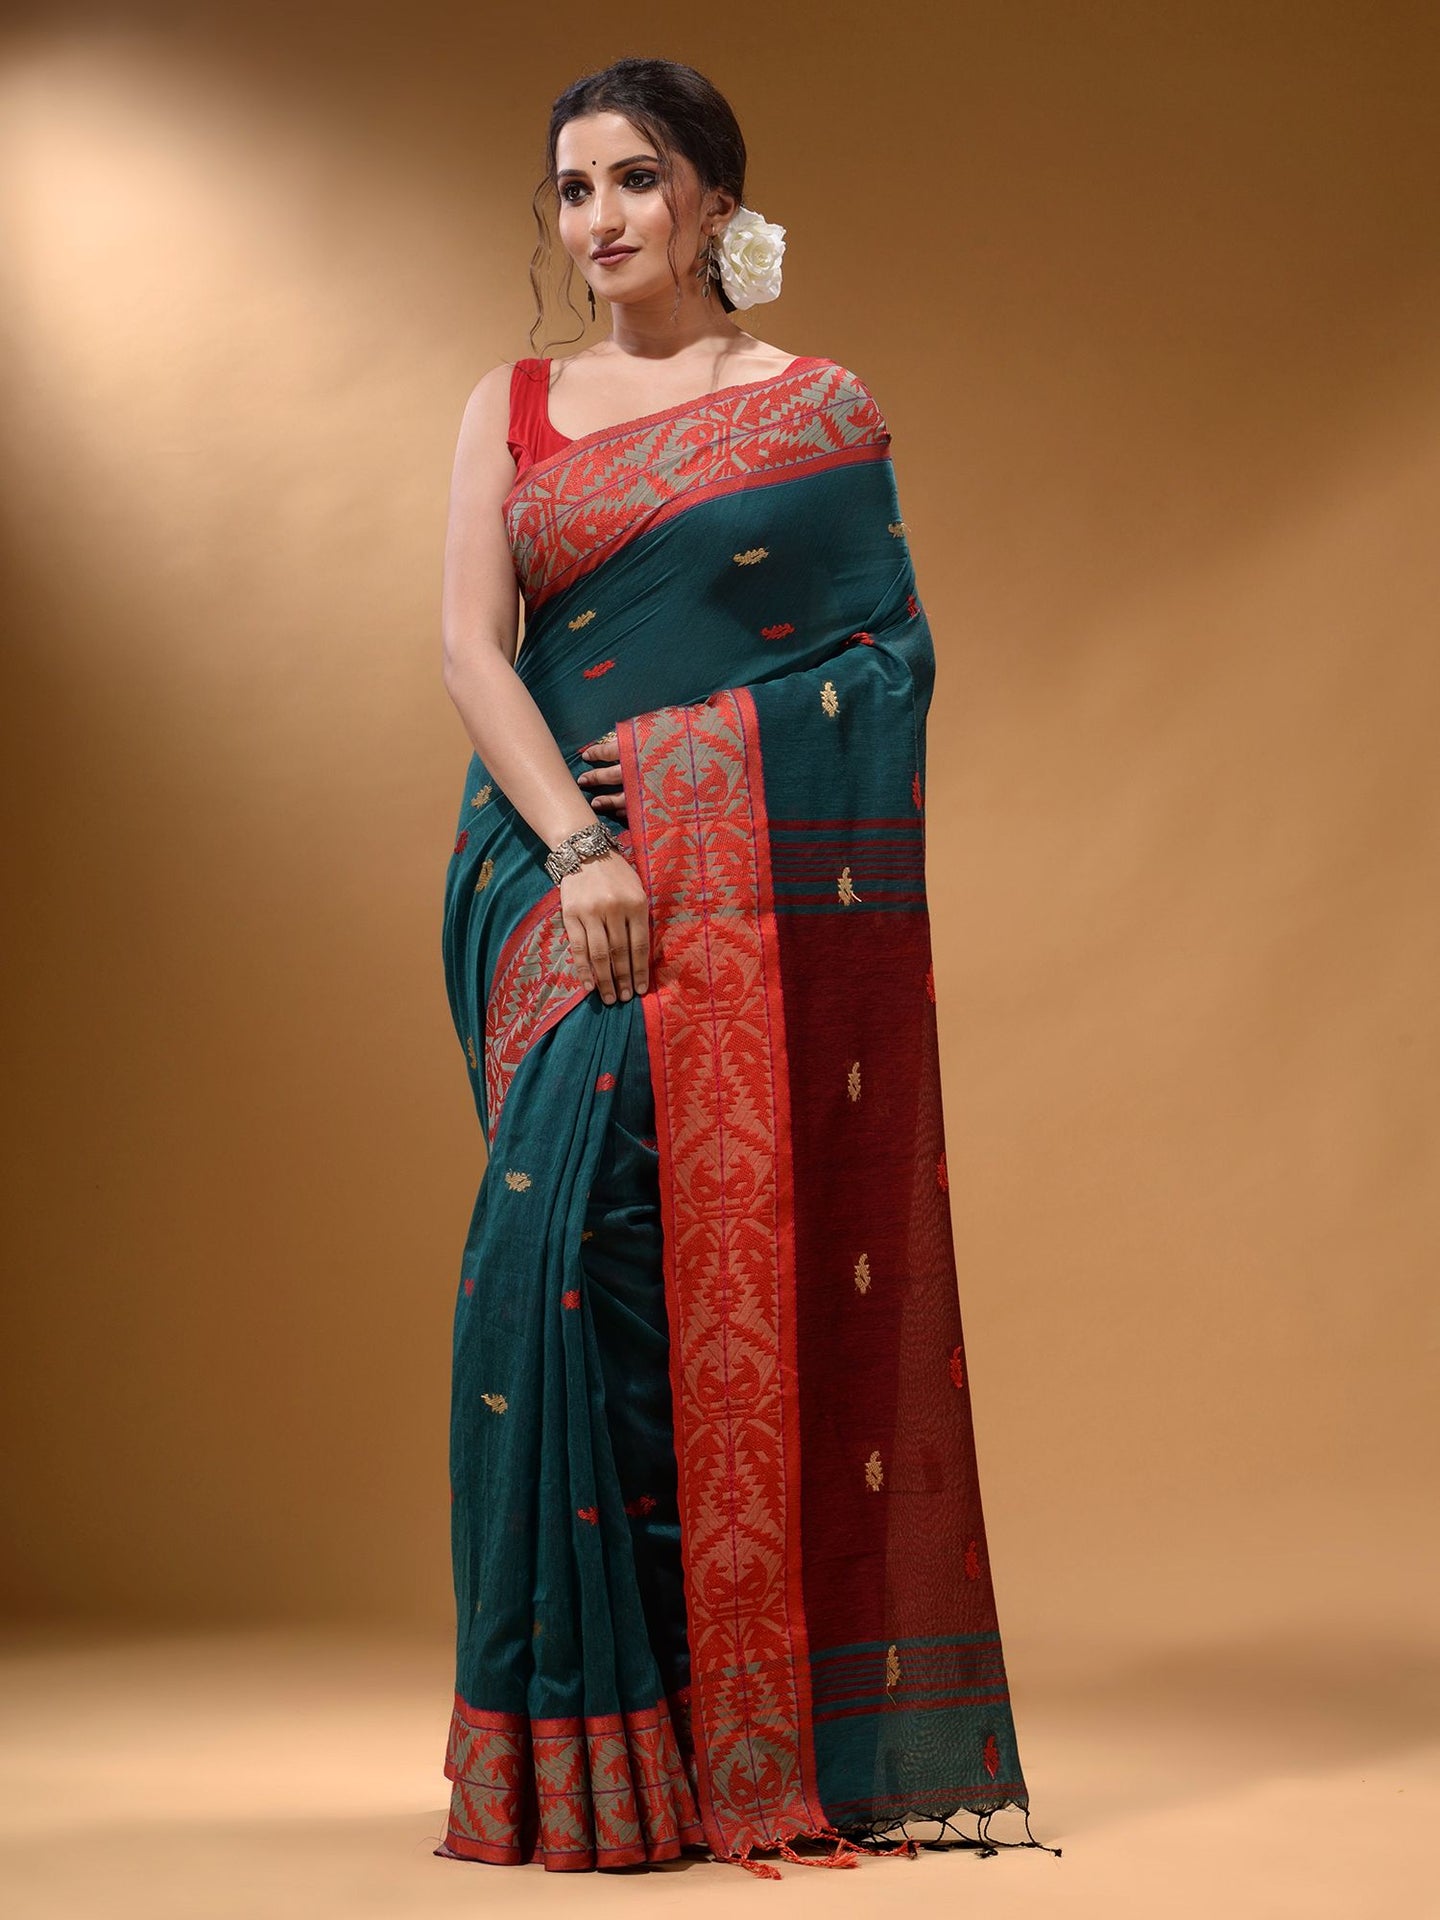 Teal Cotton Handspun Soft Saree With Nakshi Border And Contrast With Red Pallu